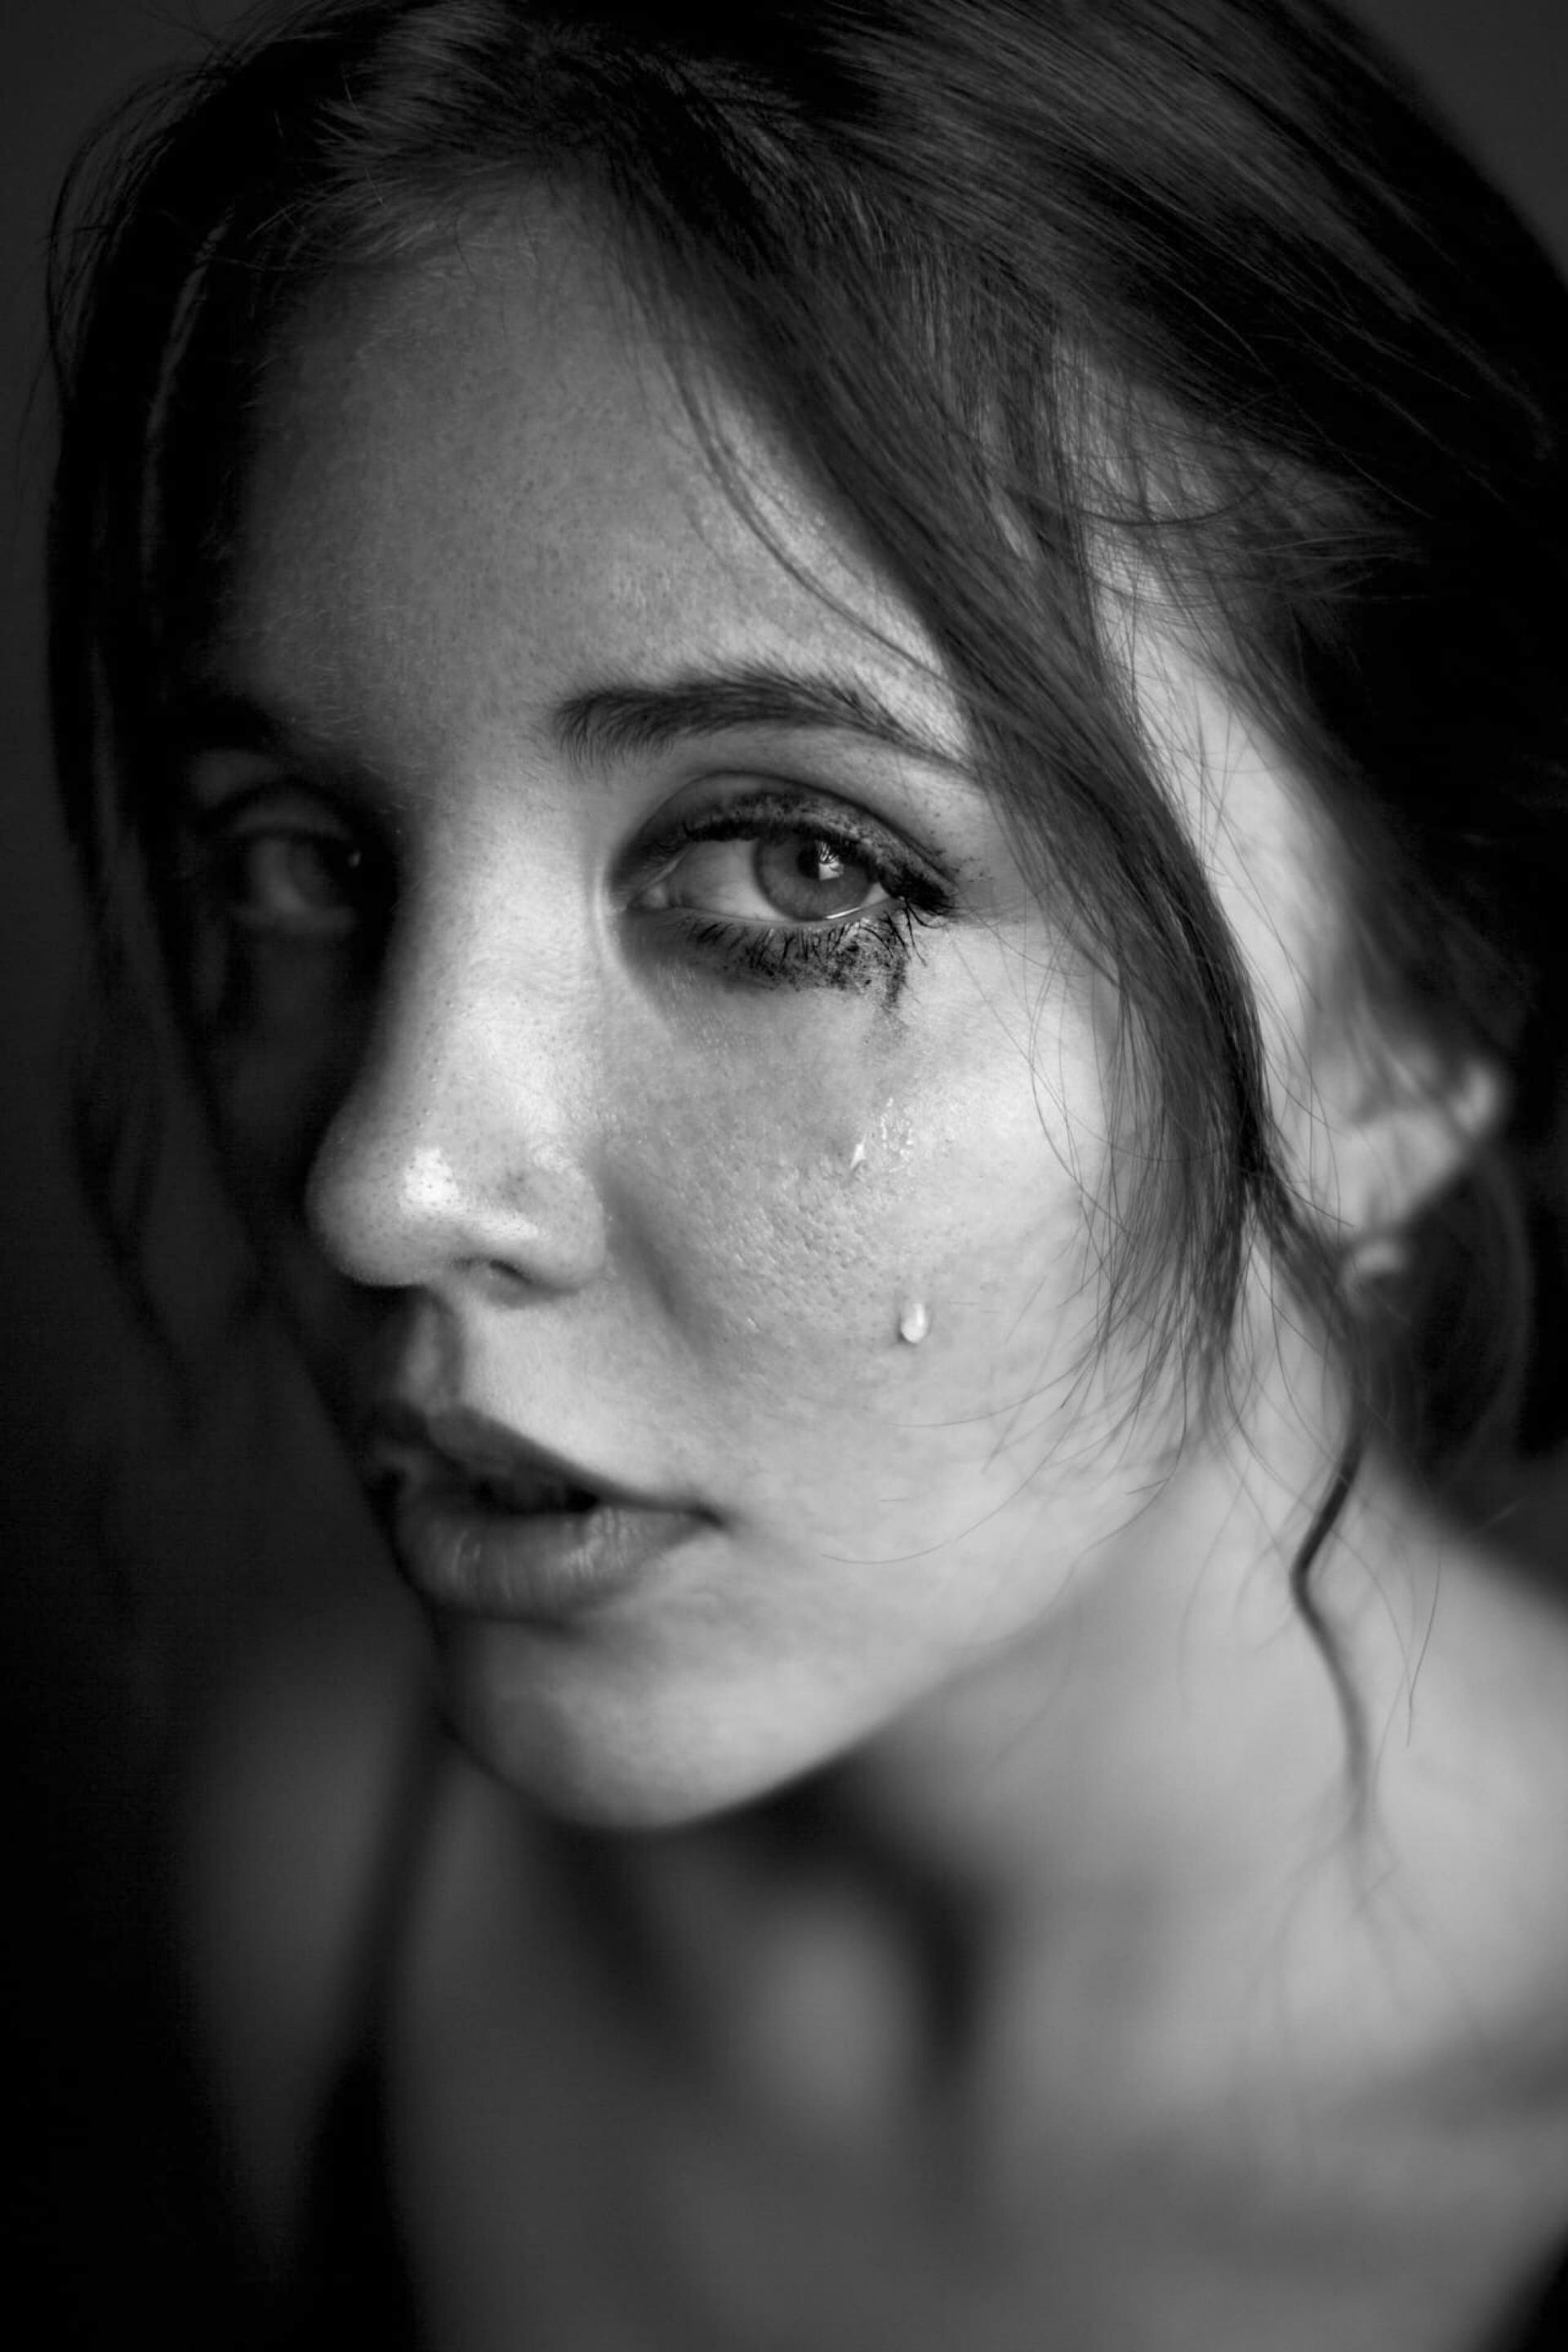 An upset woman crying | Source: Pexels